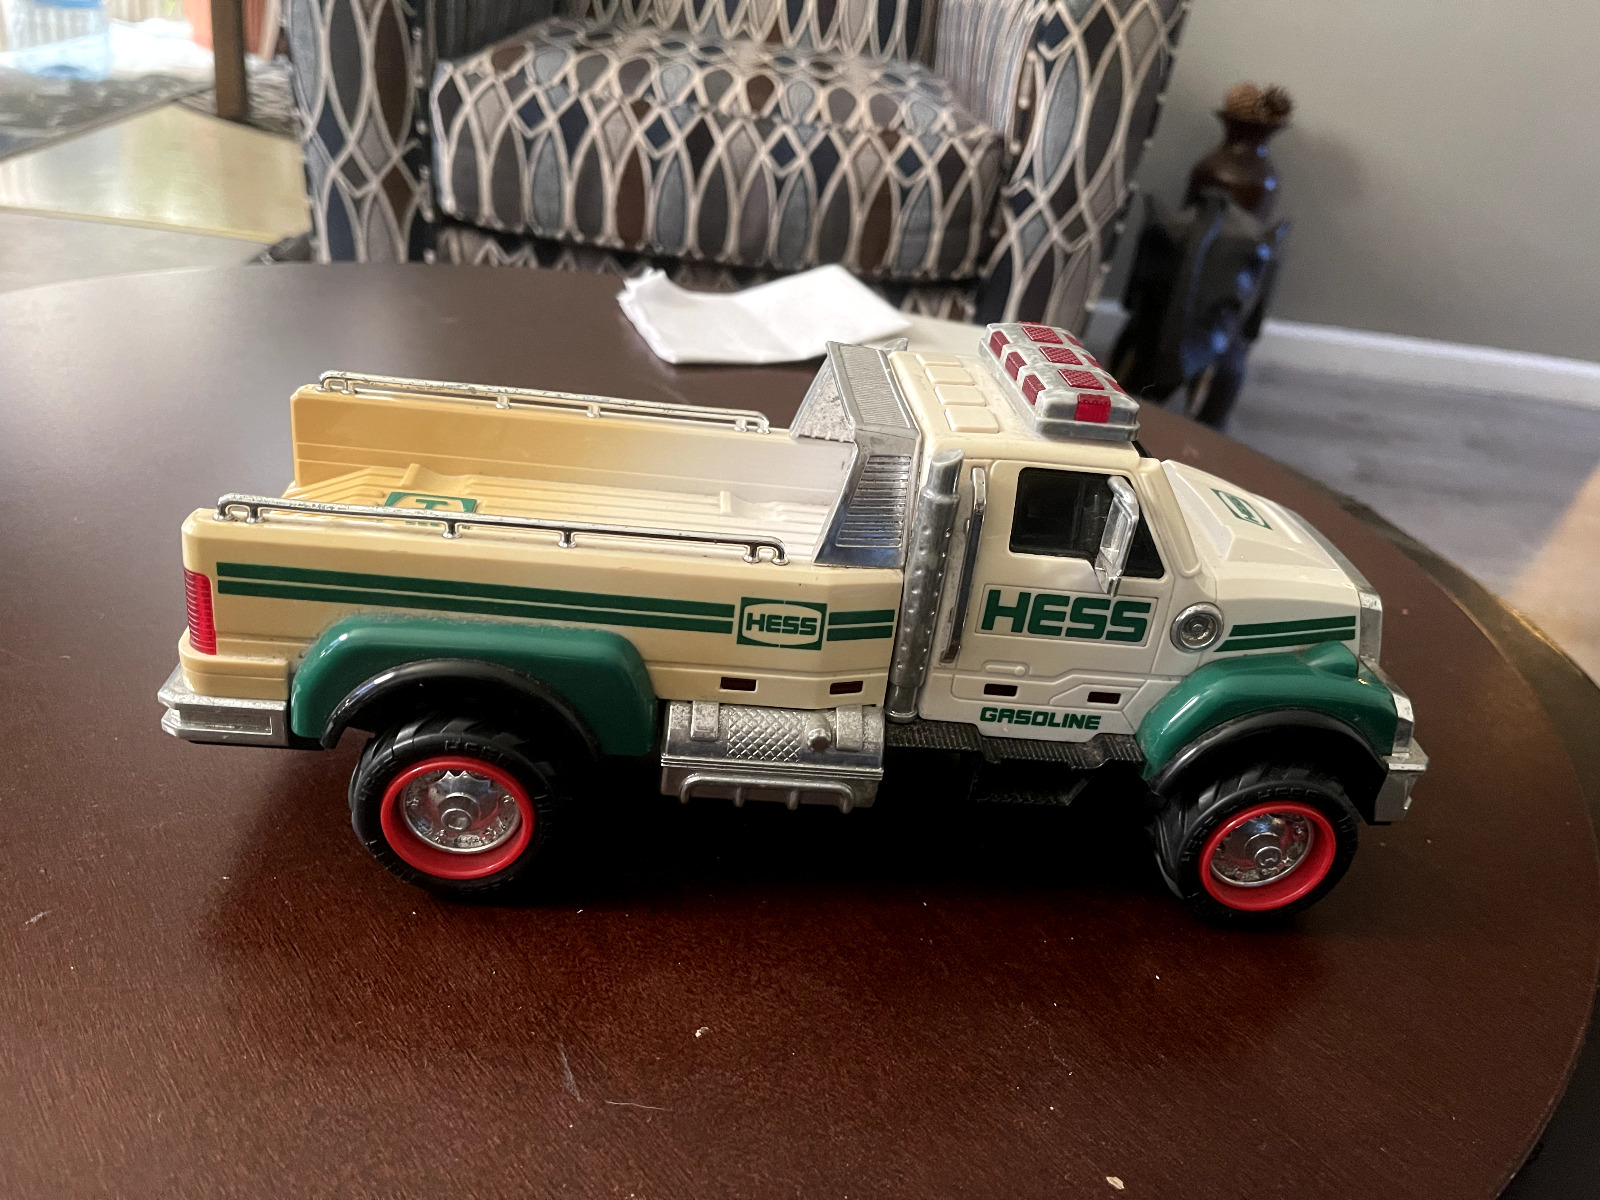 2011 Hess Pick-up Truck, siren and light are working Batteries included.